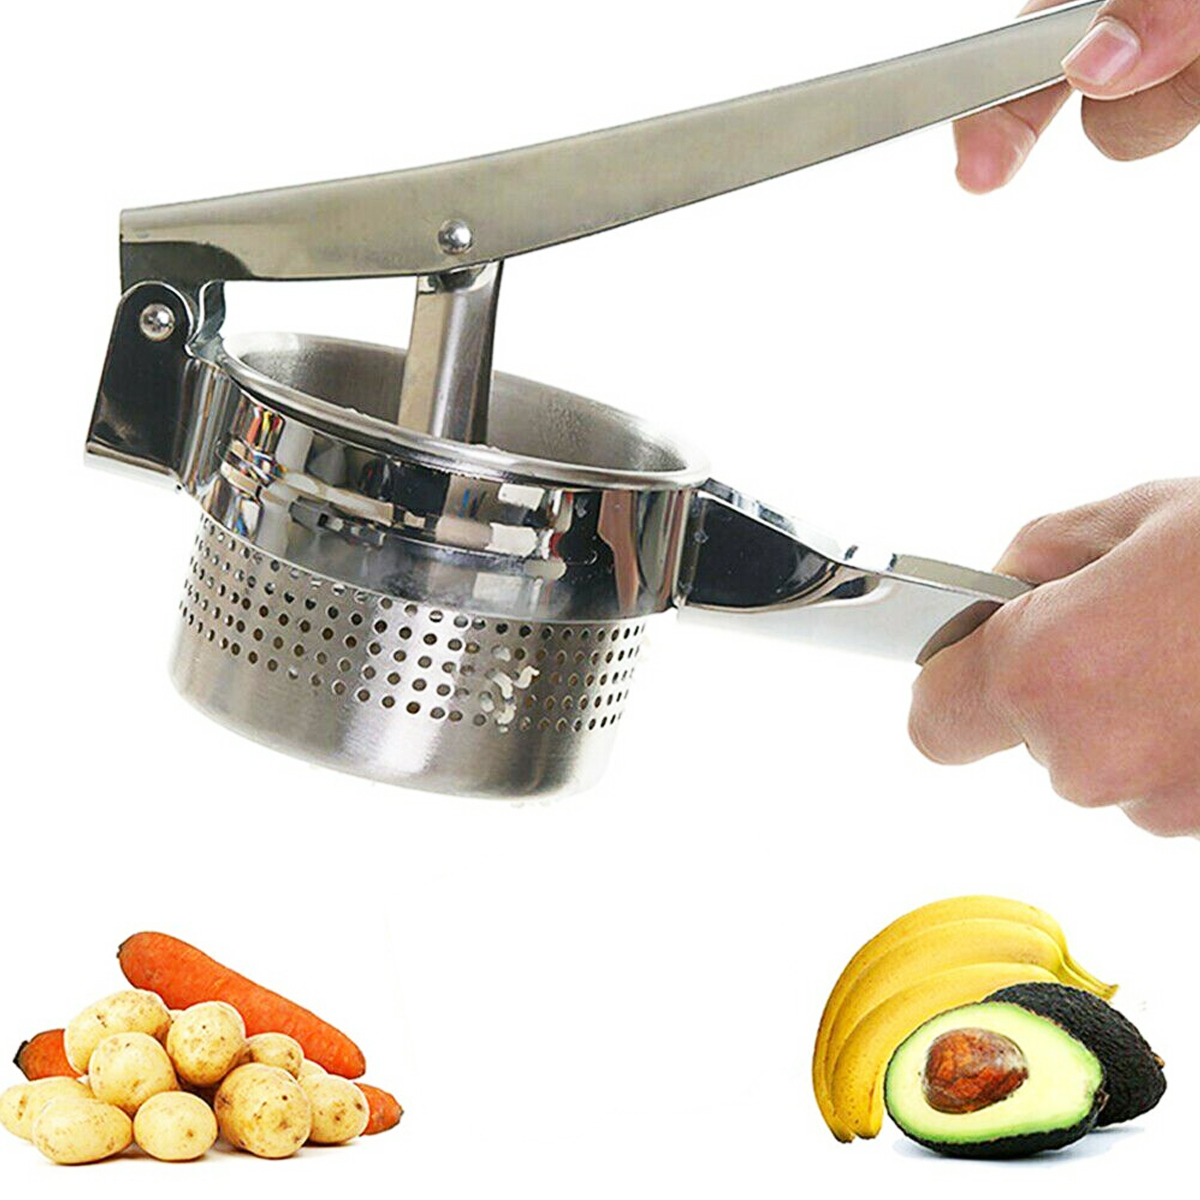 Potato Mashers Stainless Steel Puree Vegetable Garlic Presser Home Kitchen Tools Accessory